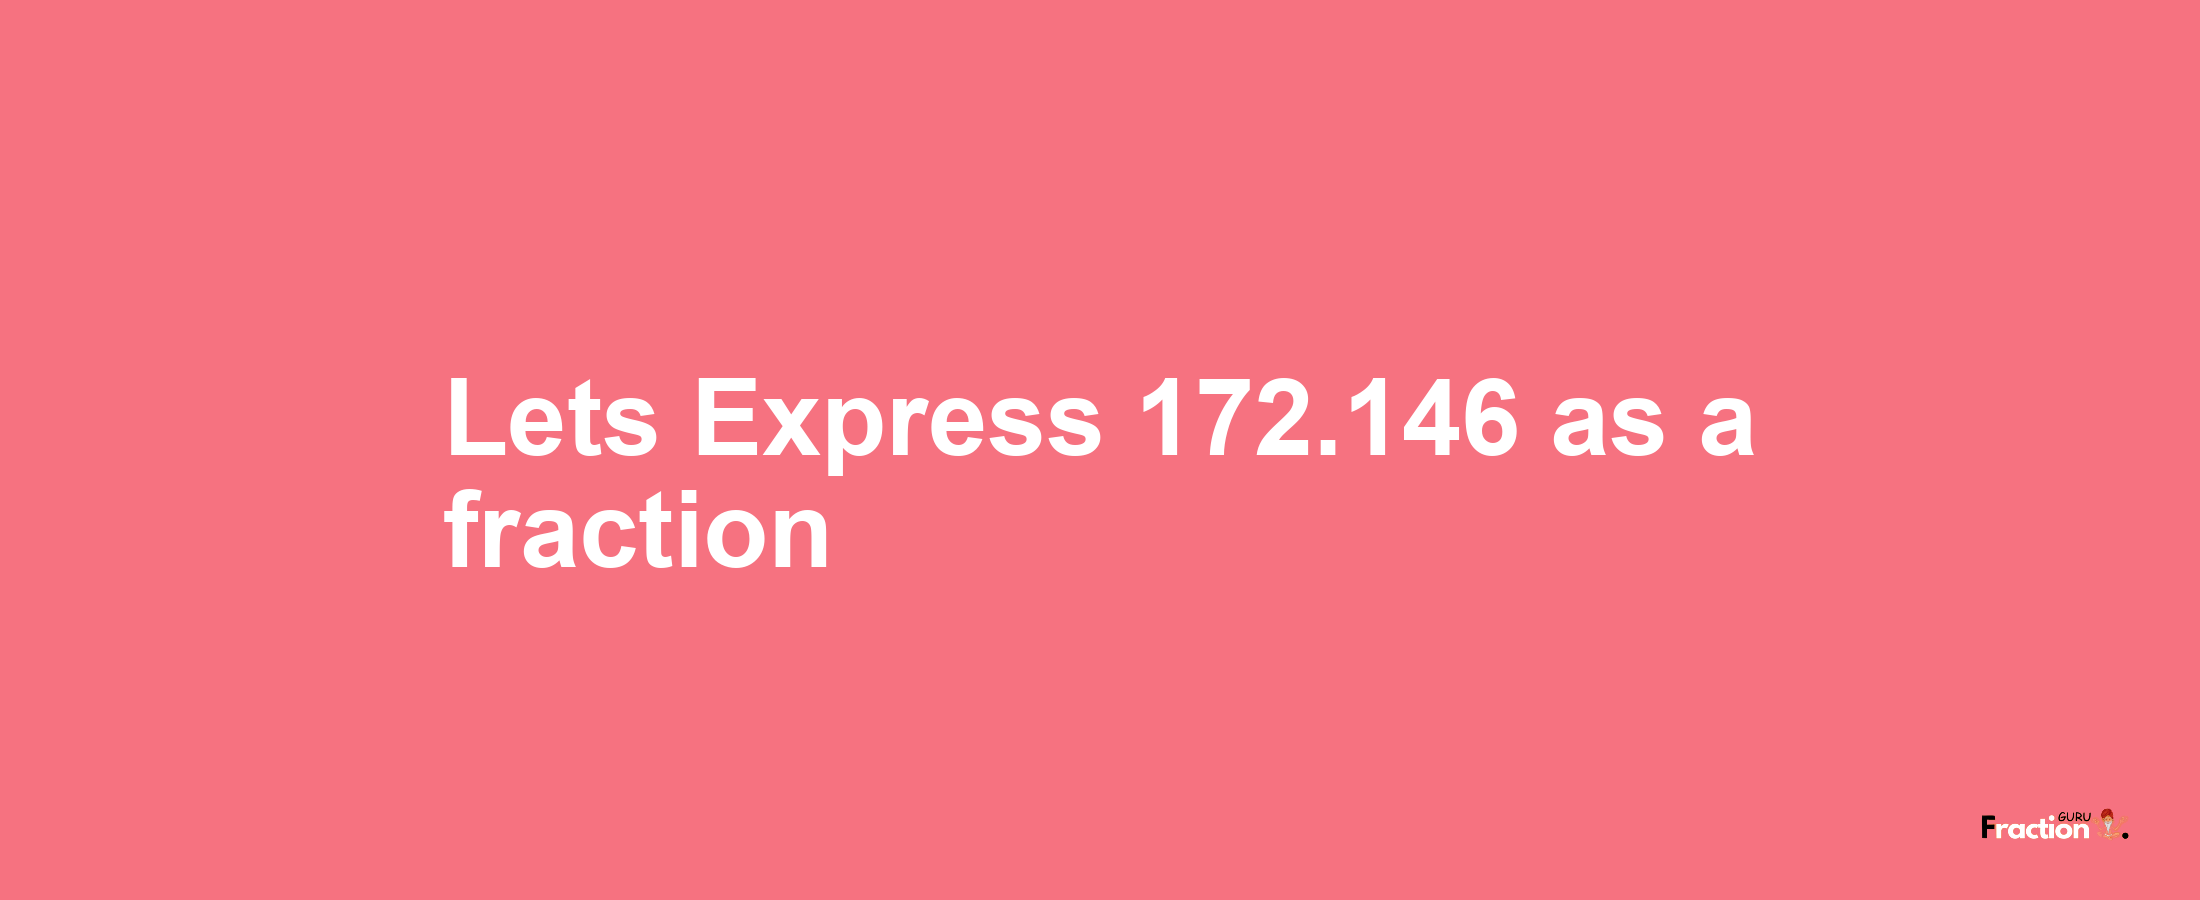 Lets Express 172.146 as afraction